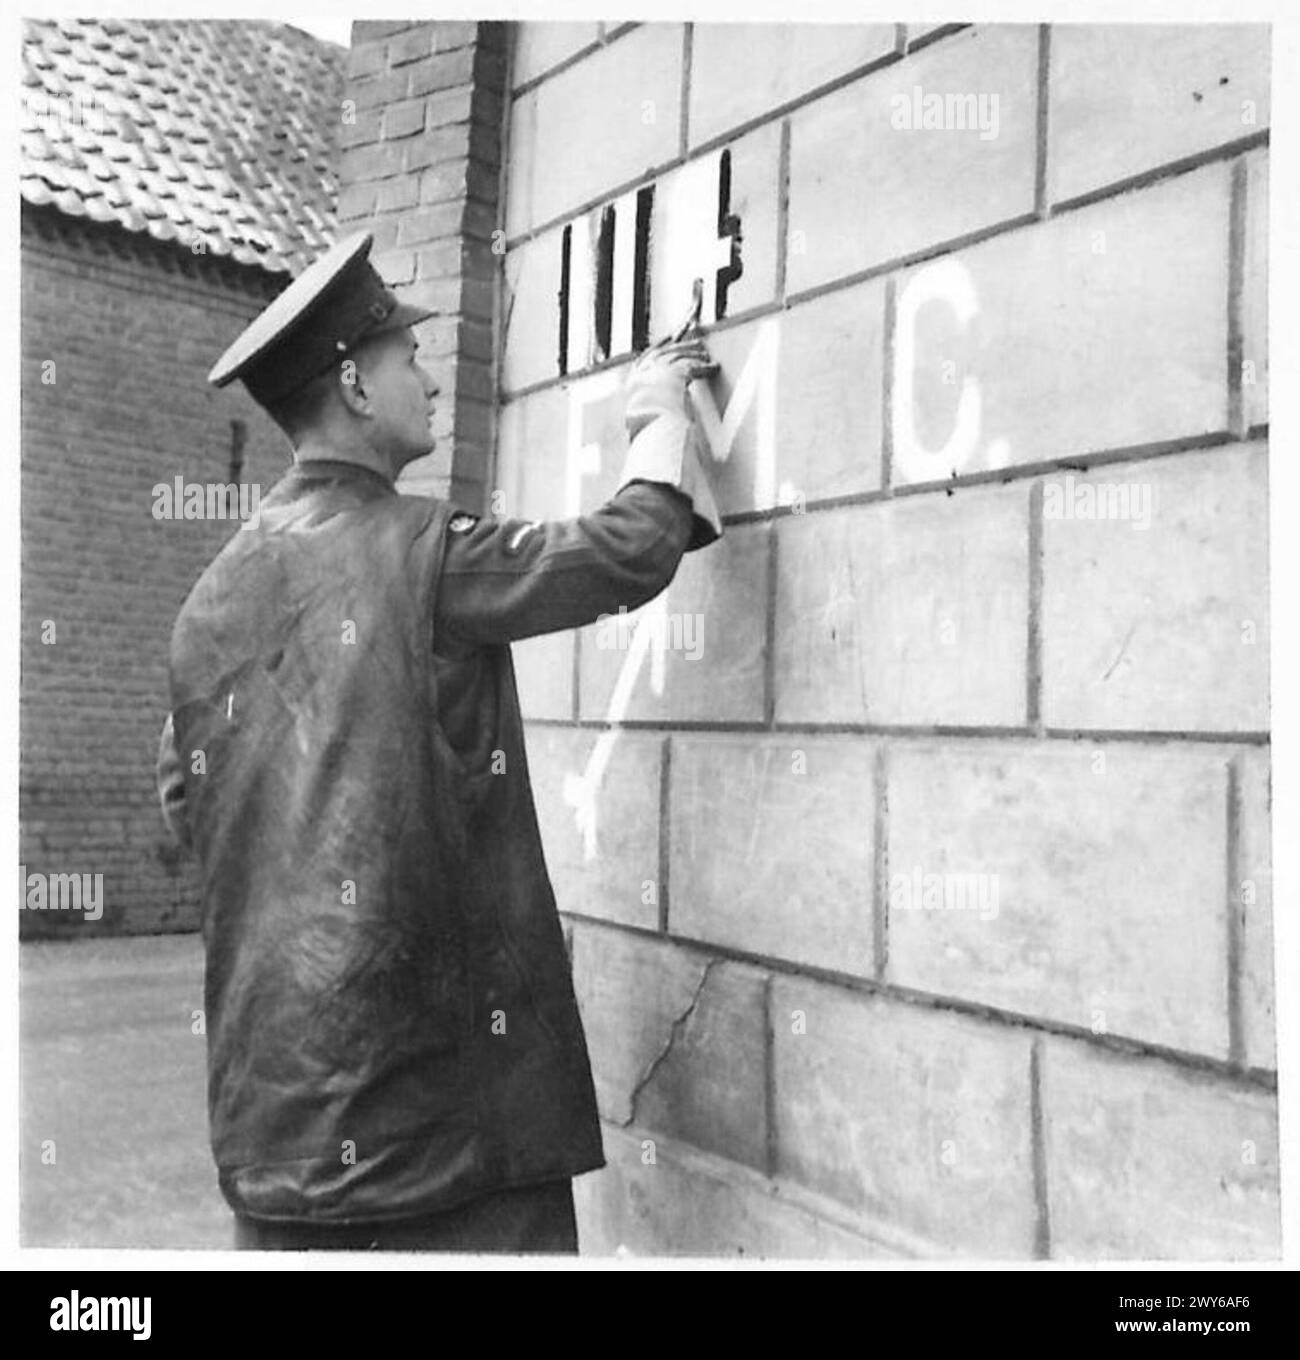 STEIN CORPS OF MILITARY POLICE AT WORK - L/Cpl Parsons altering a sign painted on a wall. L/Cpl W.A. Parsons: Married. Lives at 57 Westcourt Road, Worthing, Sussex. Before the War, a Costletizer (anti-rust proofing of motor-bikes), working for Associated Motorcycles Ltd, Plumstead. Joined the Army in May 1939. Was in BEF and landed in France D/15. Hobby - Cycling. , British Army, 21st Army Group Stock Photo